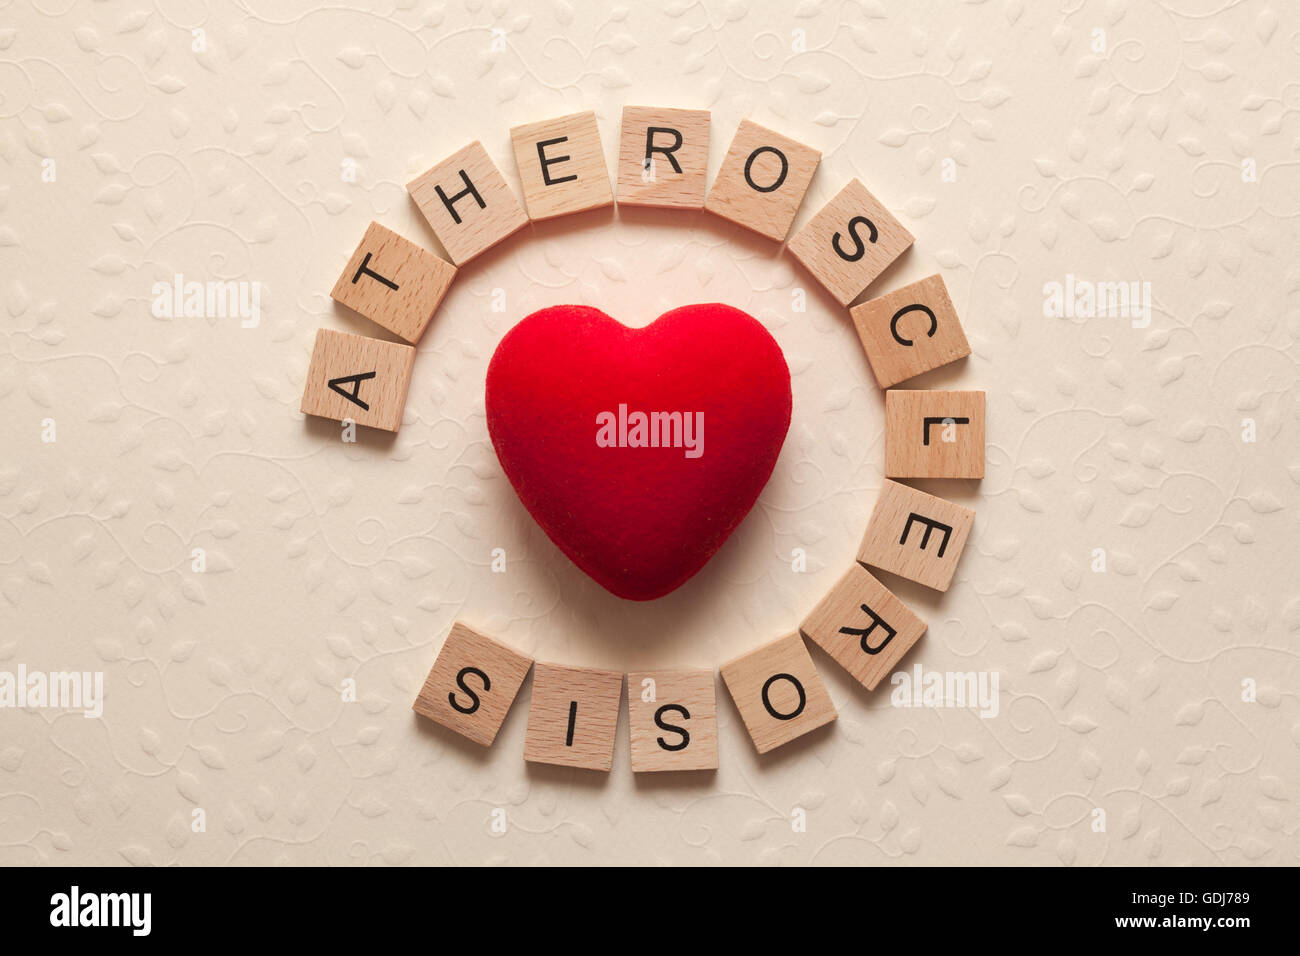 The word atherosclerosis formed with wooden letters and a heart in the middle Stock Photo